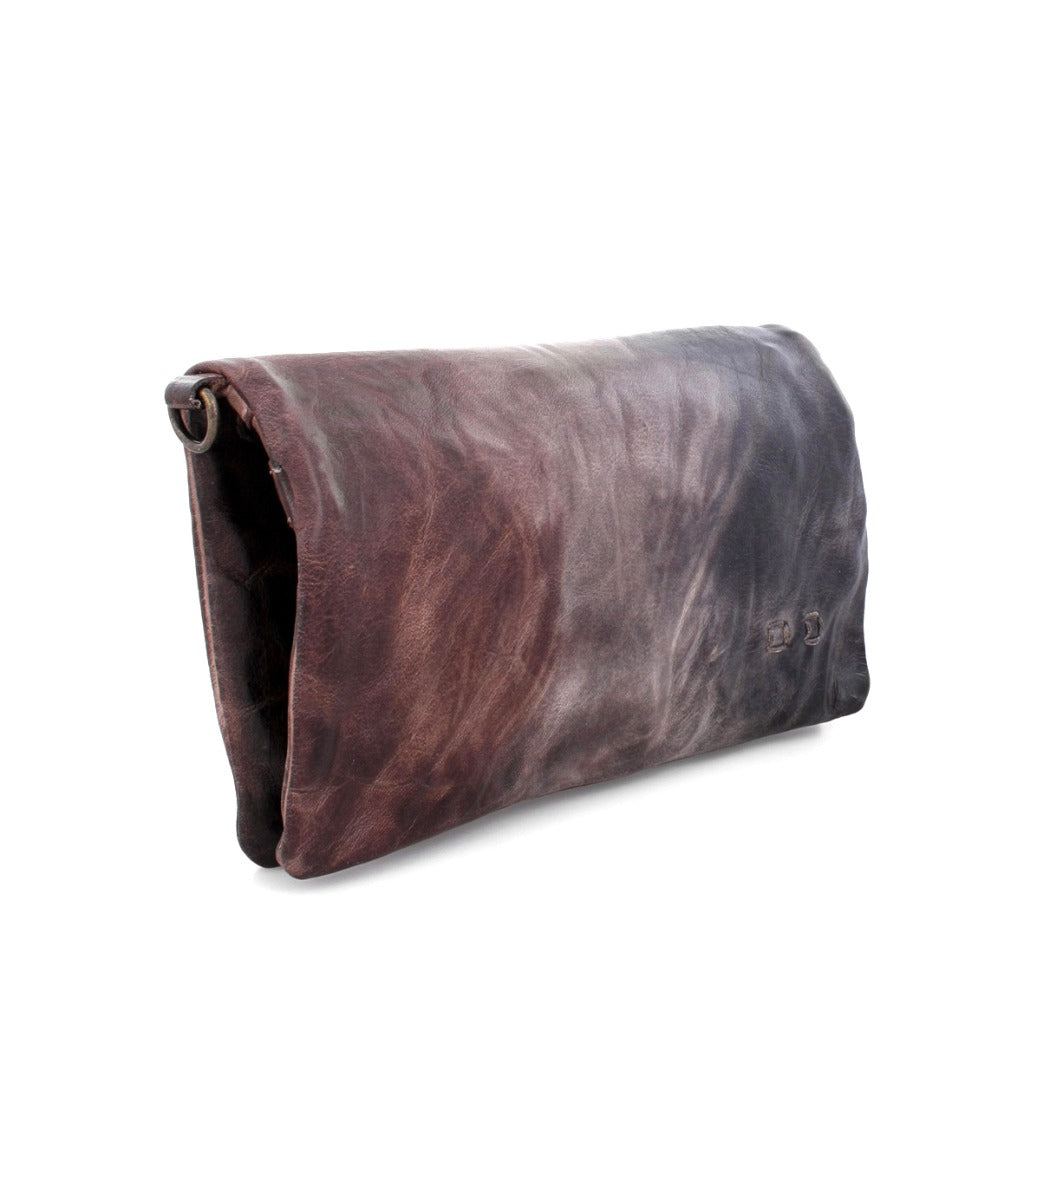 A brown and black Cadence leather clutch bag by Bed Stu.